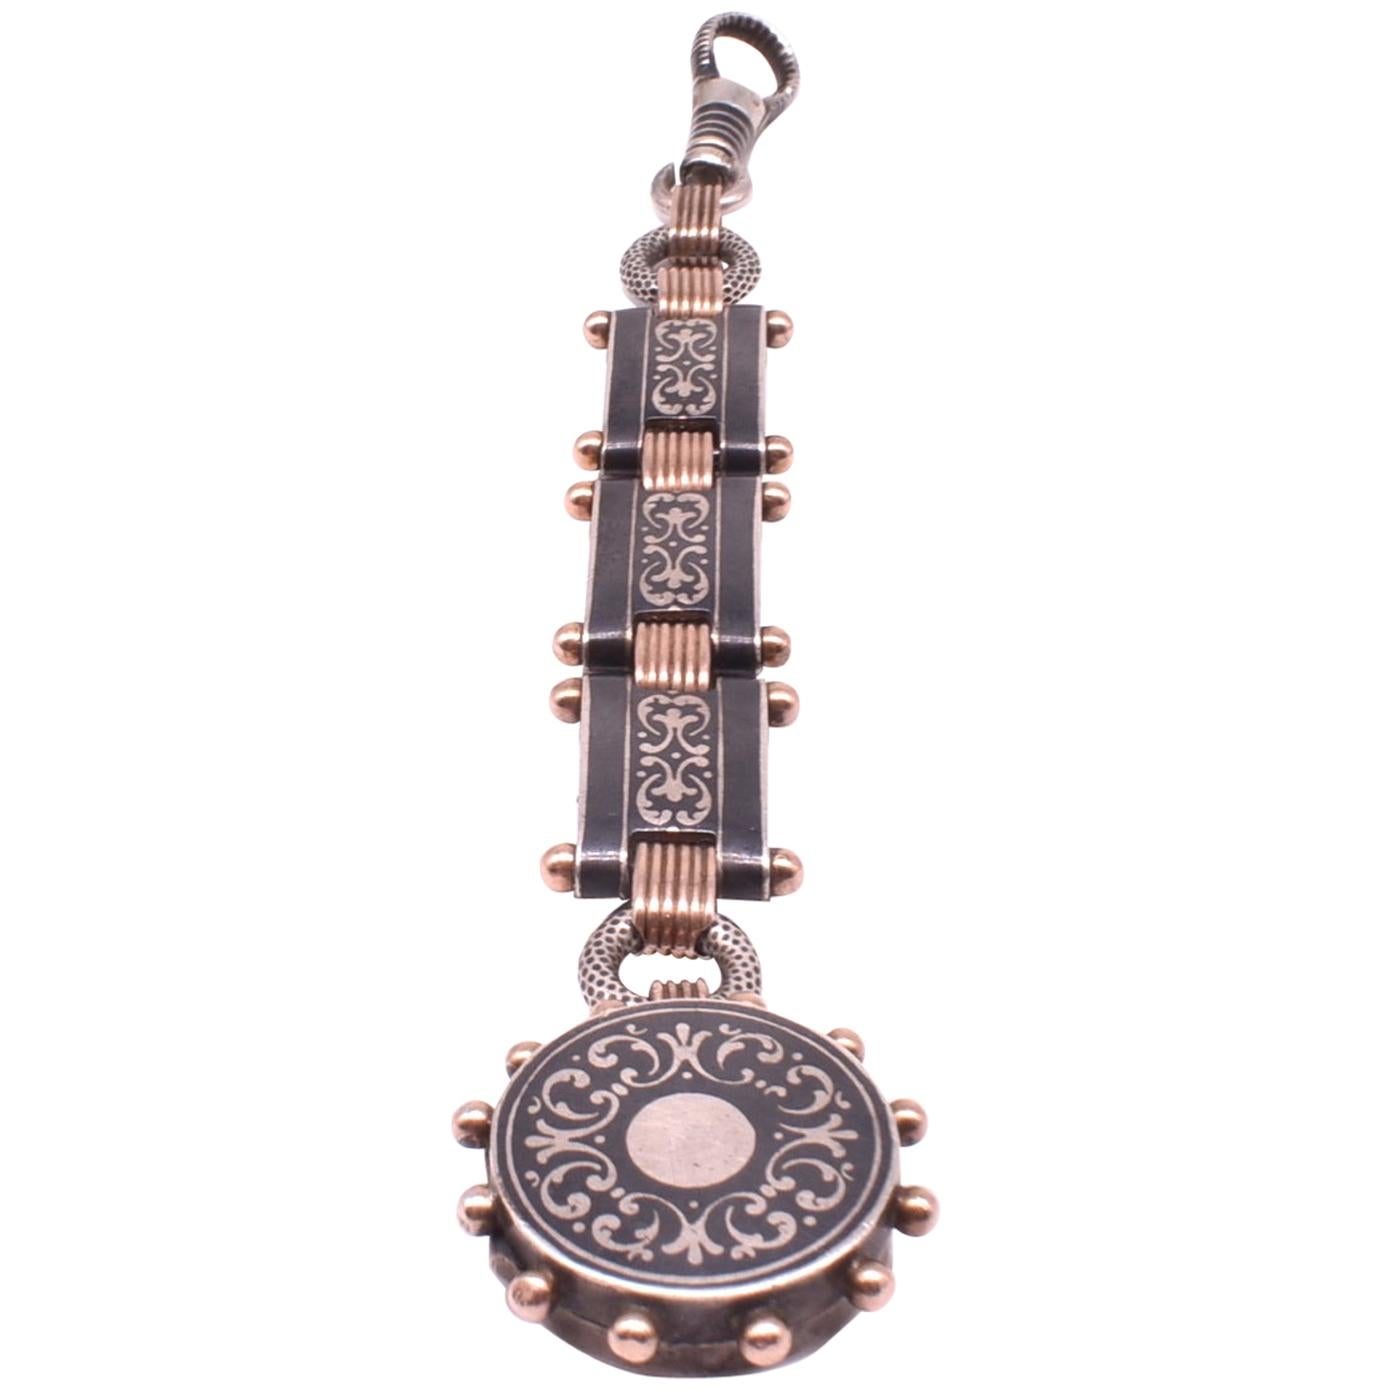 Antique Silver and Gold Niello Fob Pendant Linked with Locket, circa 1890